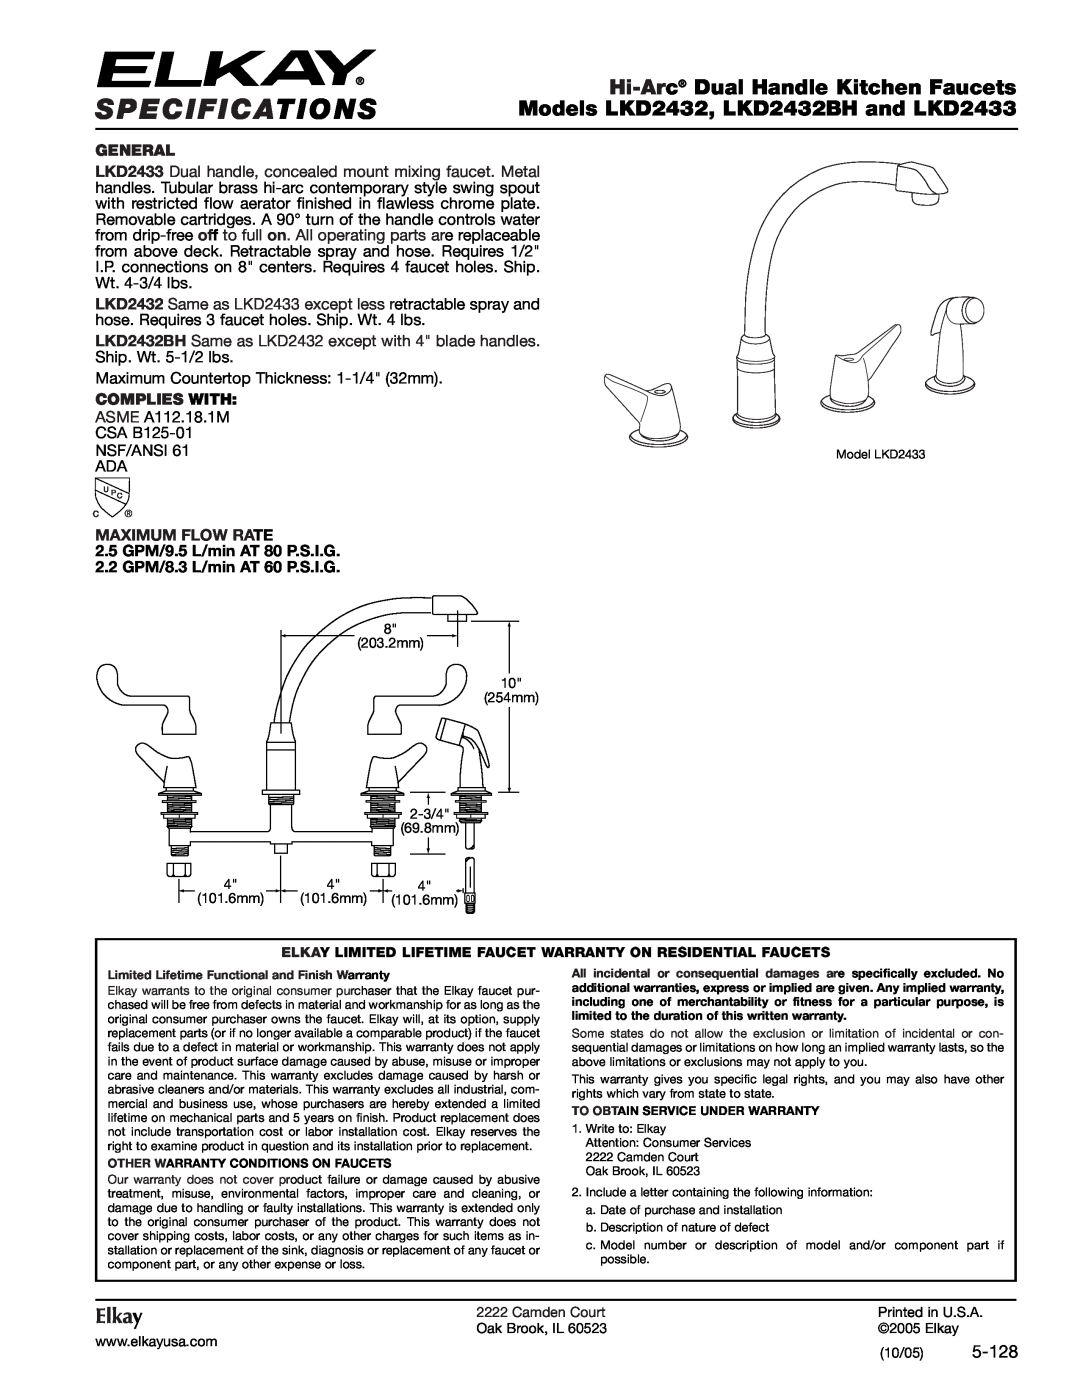 Elkay specifications Specifications, Hi-Arc Dual Handle Kitchen Faucets, Models LKD2432, LKD2432BH and LKD2433, Elkay 